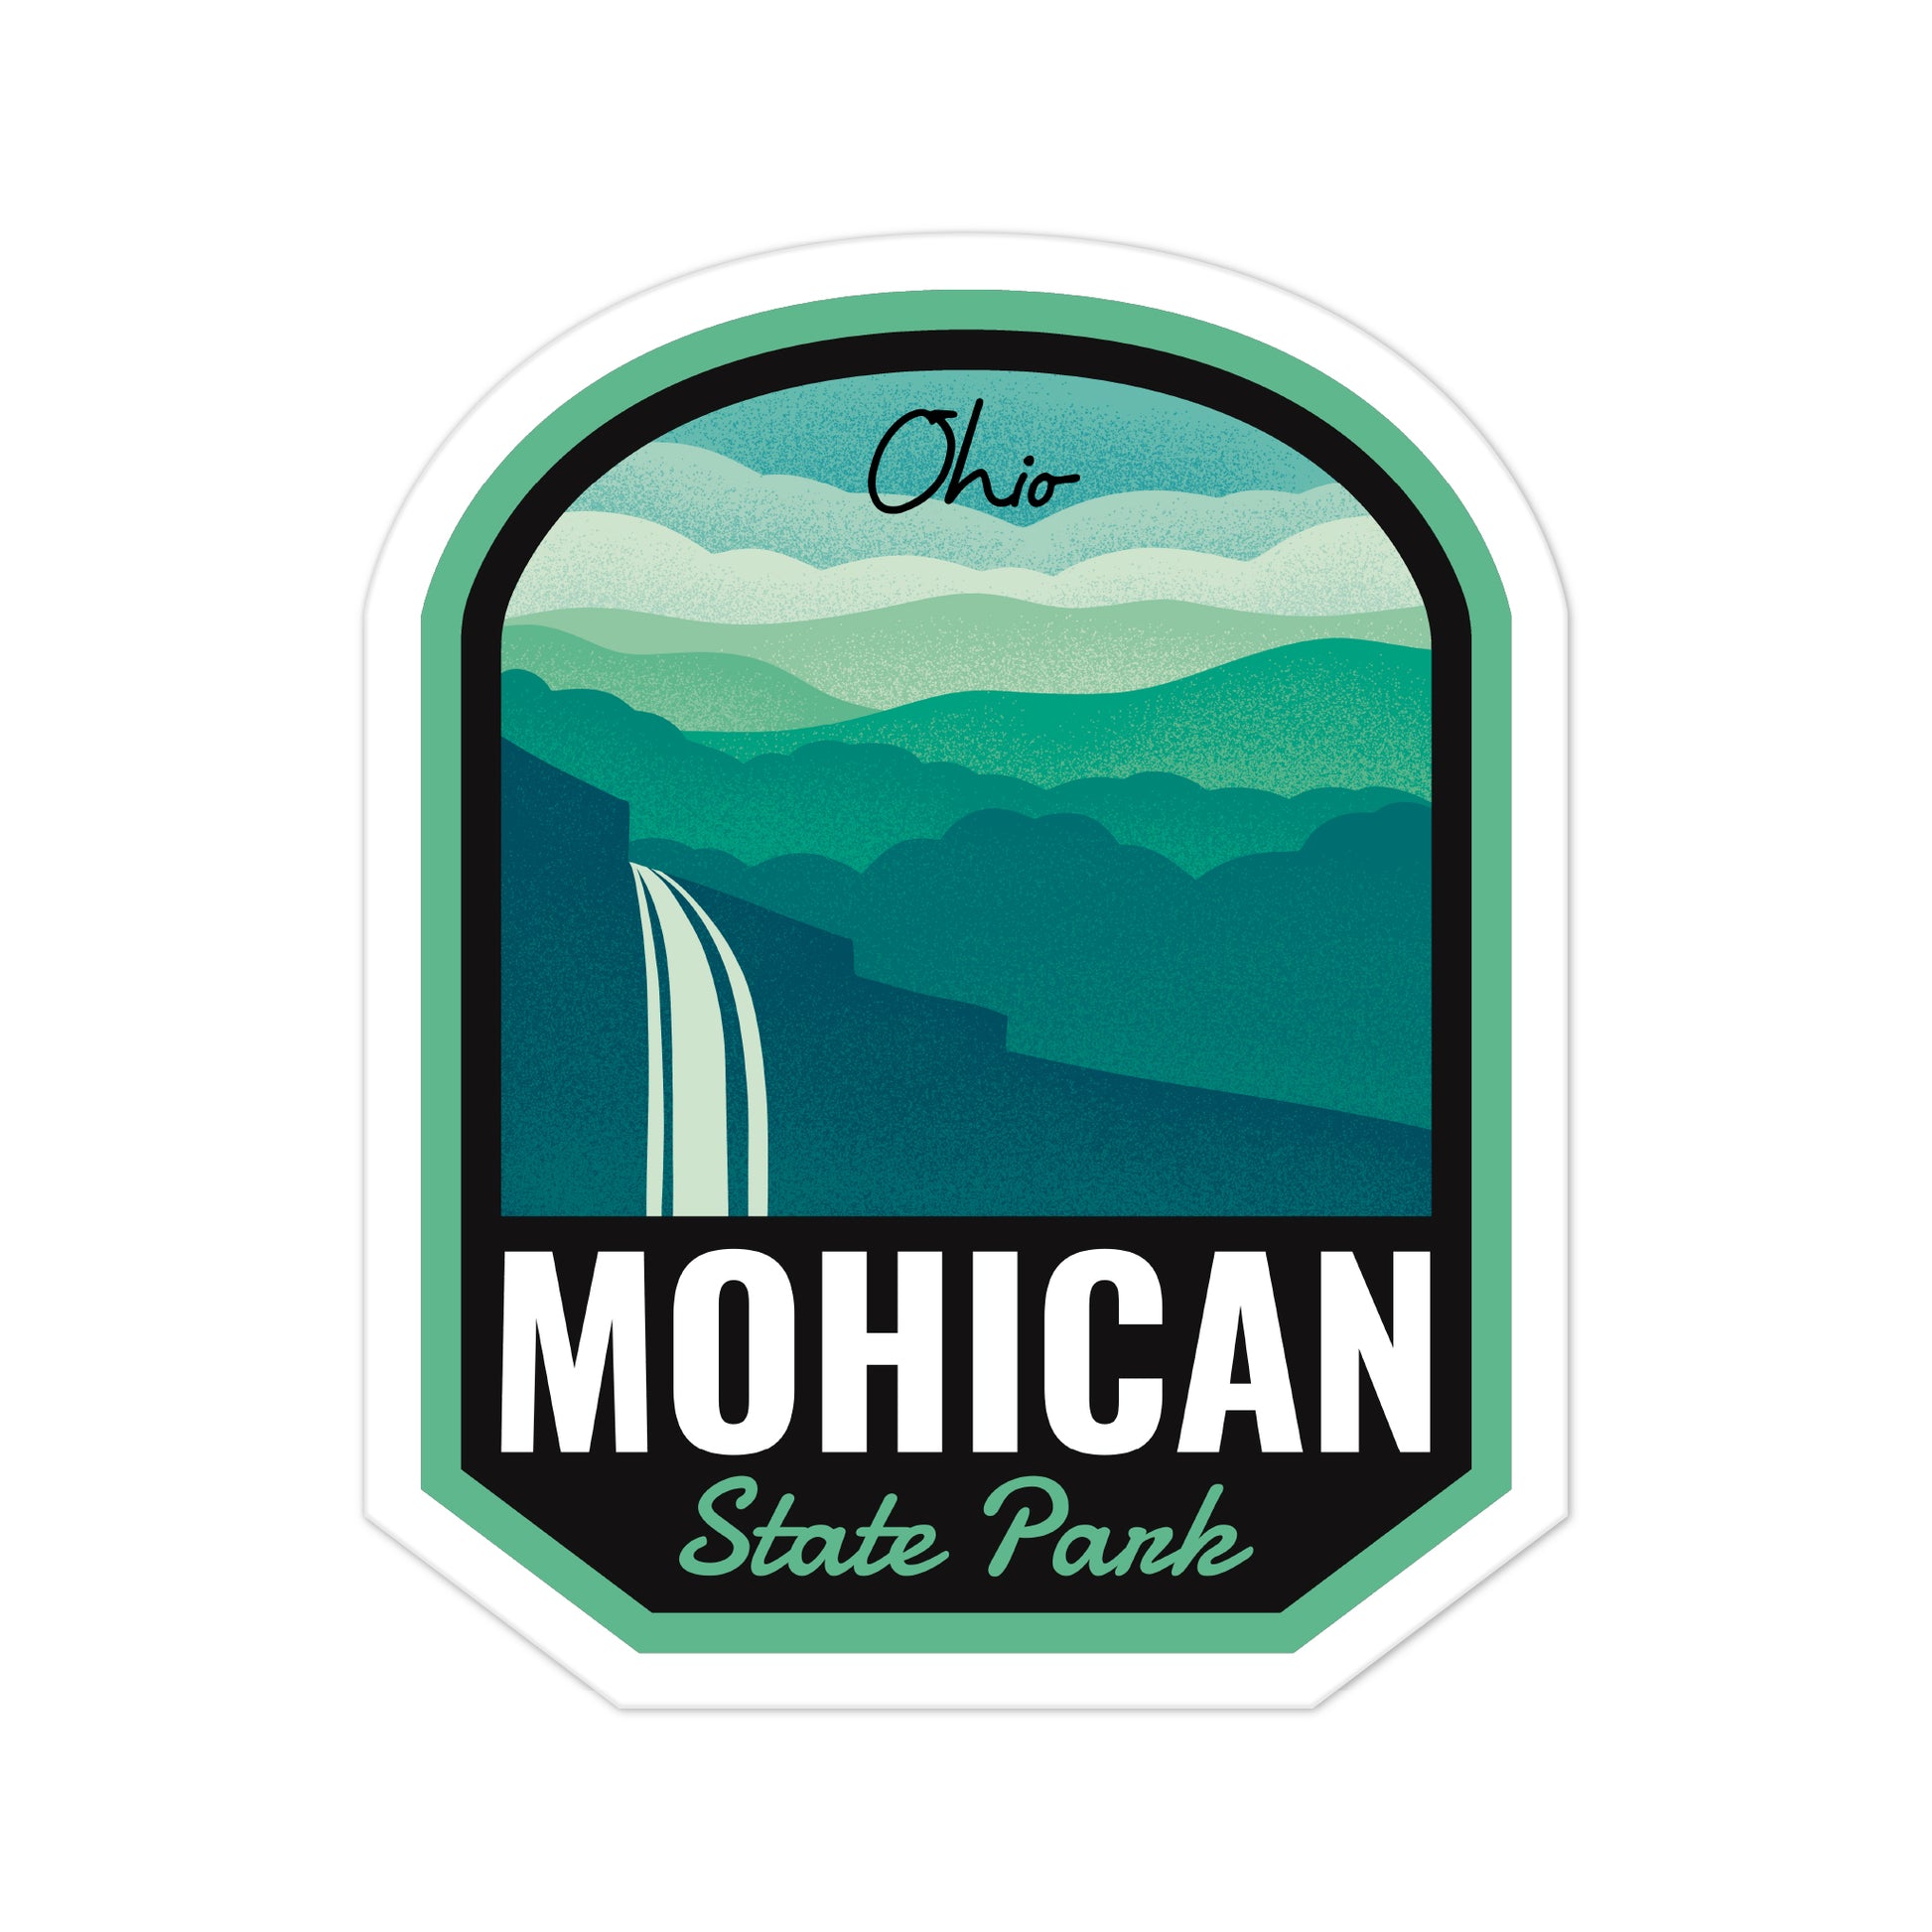 A sticker of Mohican State Park